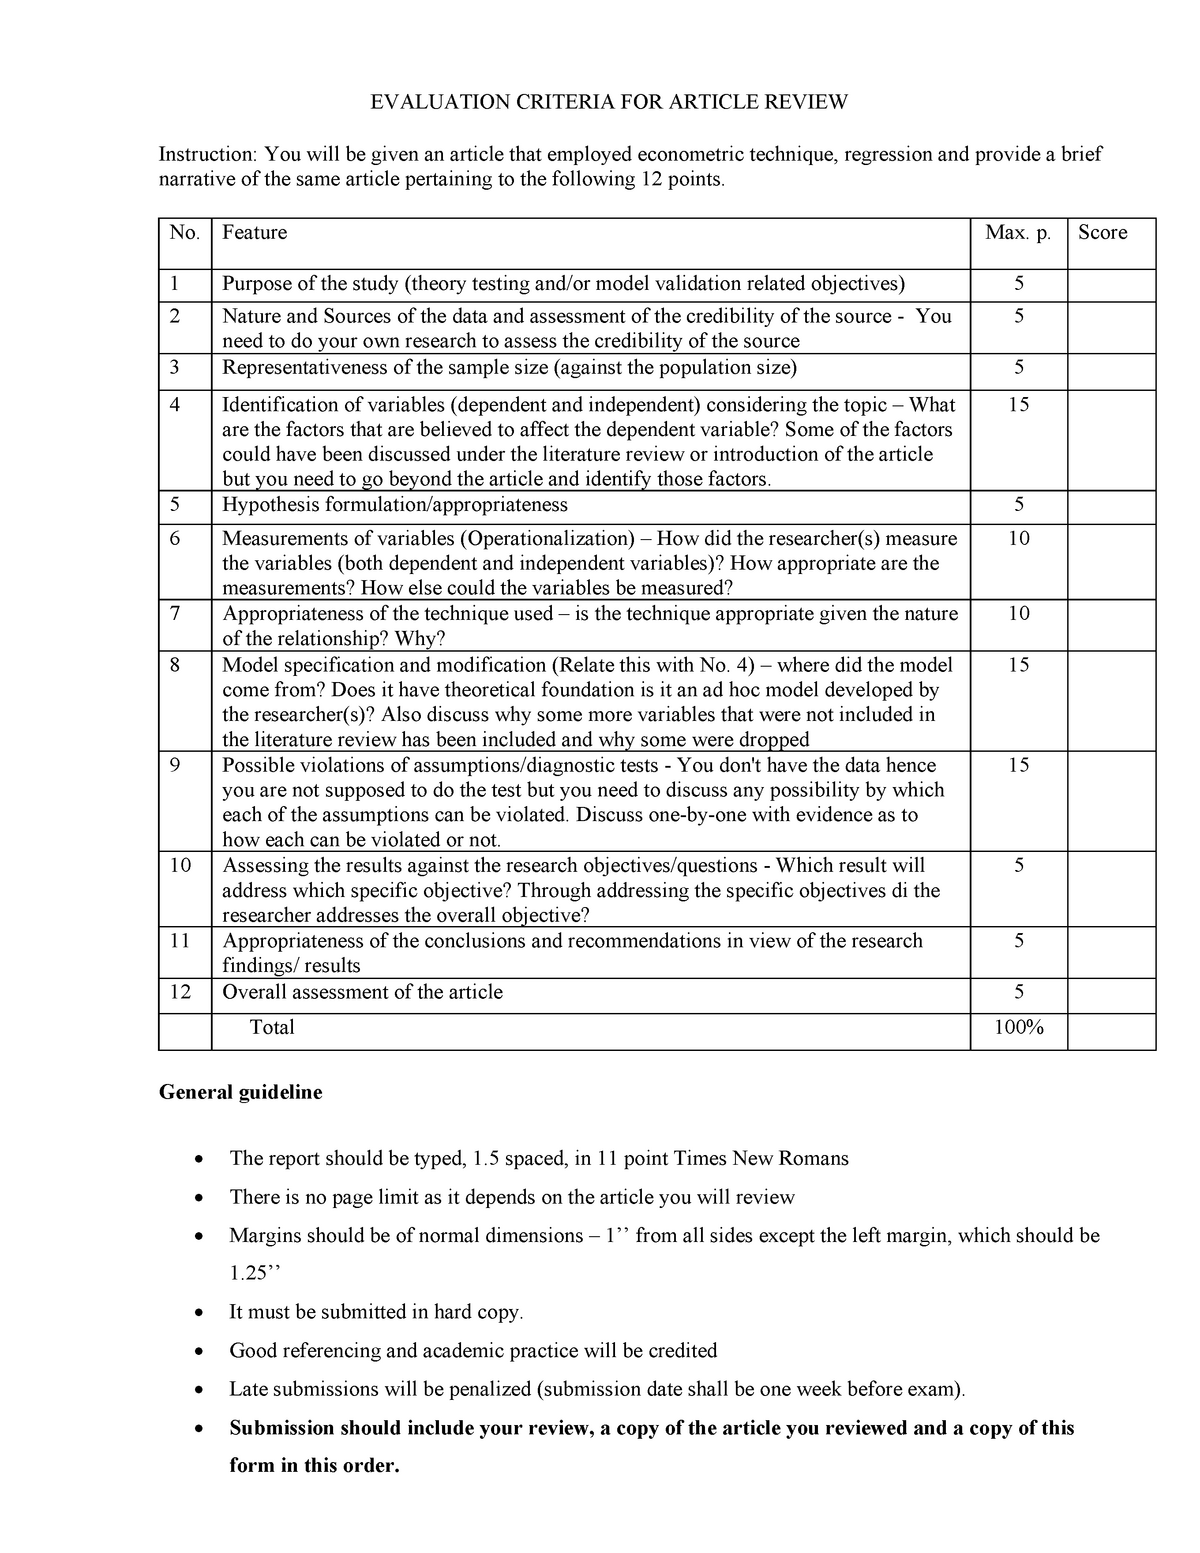 criteria for article review pdf